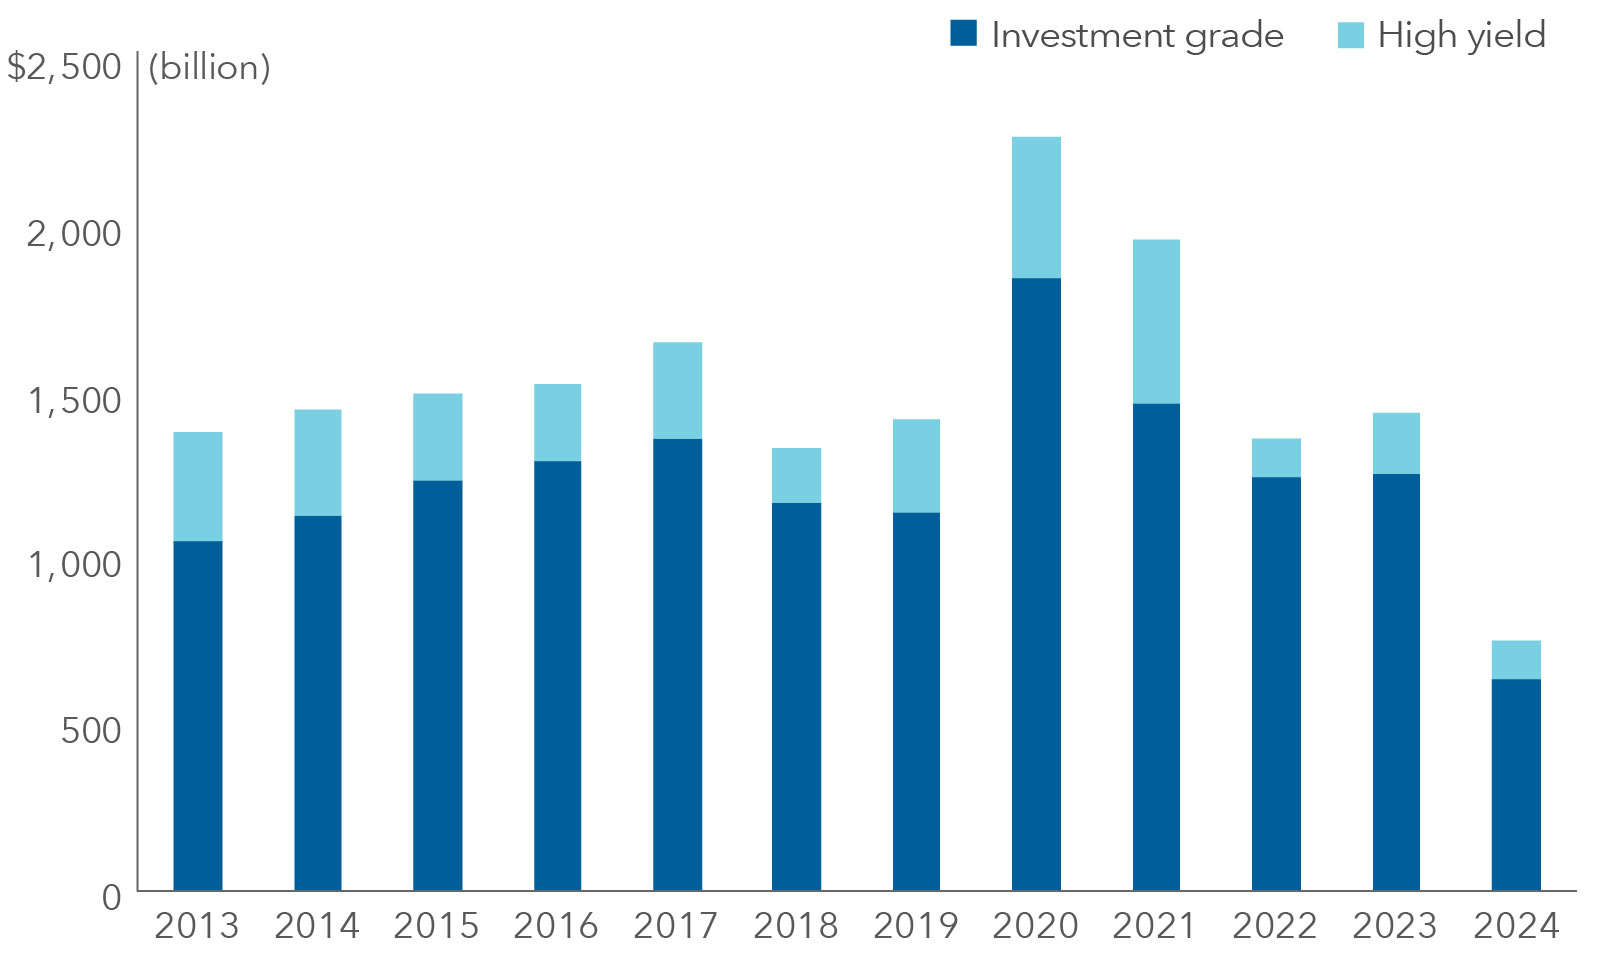 The stacked bar chart compares the amount of investment-grade and high-yield corporate bonds issued from 2013 through April 30, 2024. Each year is represented. High-yield debt fluctuates between $100 billion and $400 billion but rises to nearly $500 billion in 2020 and 2021, followed by a sharp decline. Investment-grade corporate debt remains steadily above $1 trillion until 2020, when it sharply peaks at $1.8 trillion. Investment-grade corporate debt subsequently declines to about $600 billion in 2024. The vertical axis shows amounts in billions of U.S. dollars, and the horizontal axis lists the years.